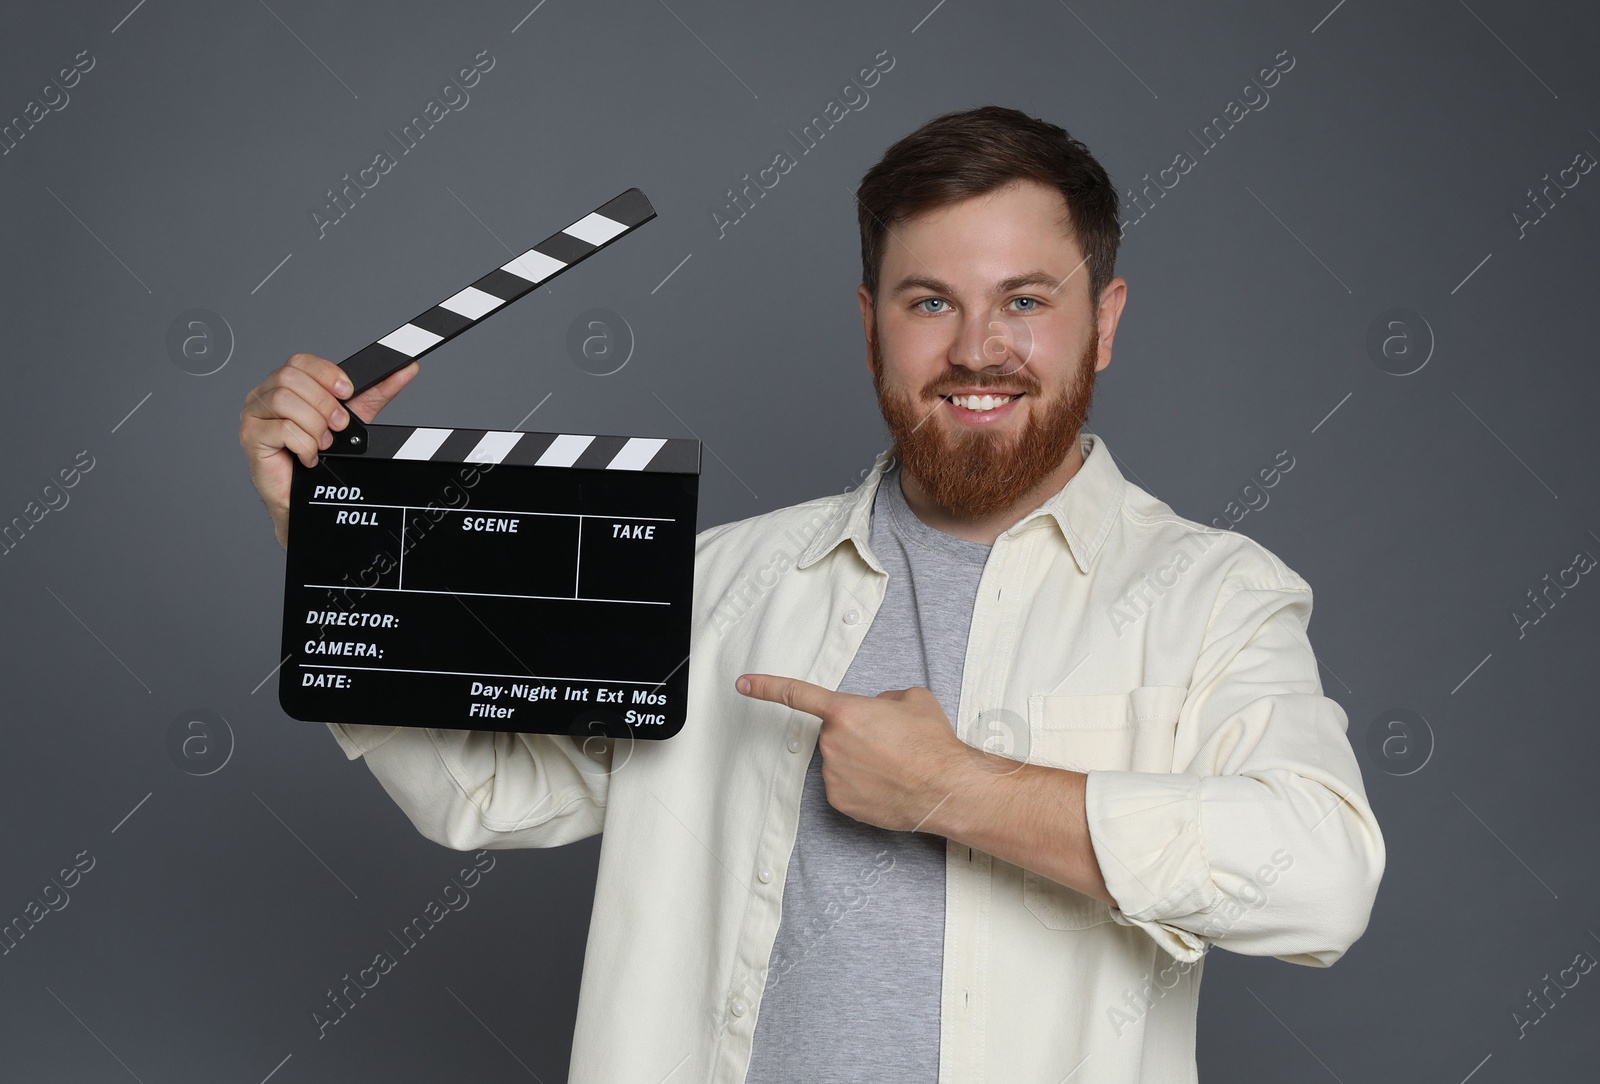 Photo of Making movie. Smiling man pointing at clapperboard on grey background